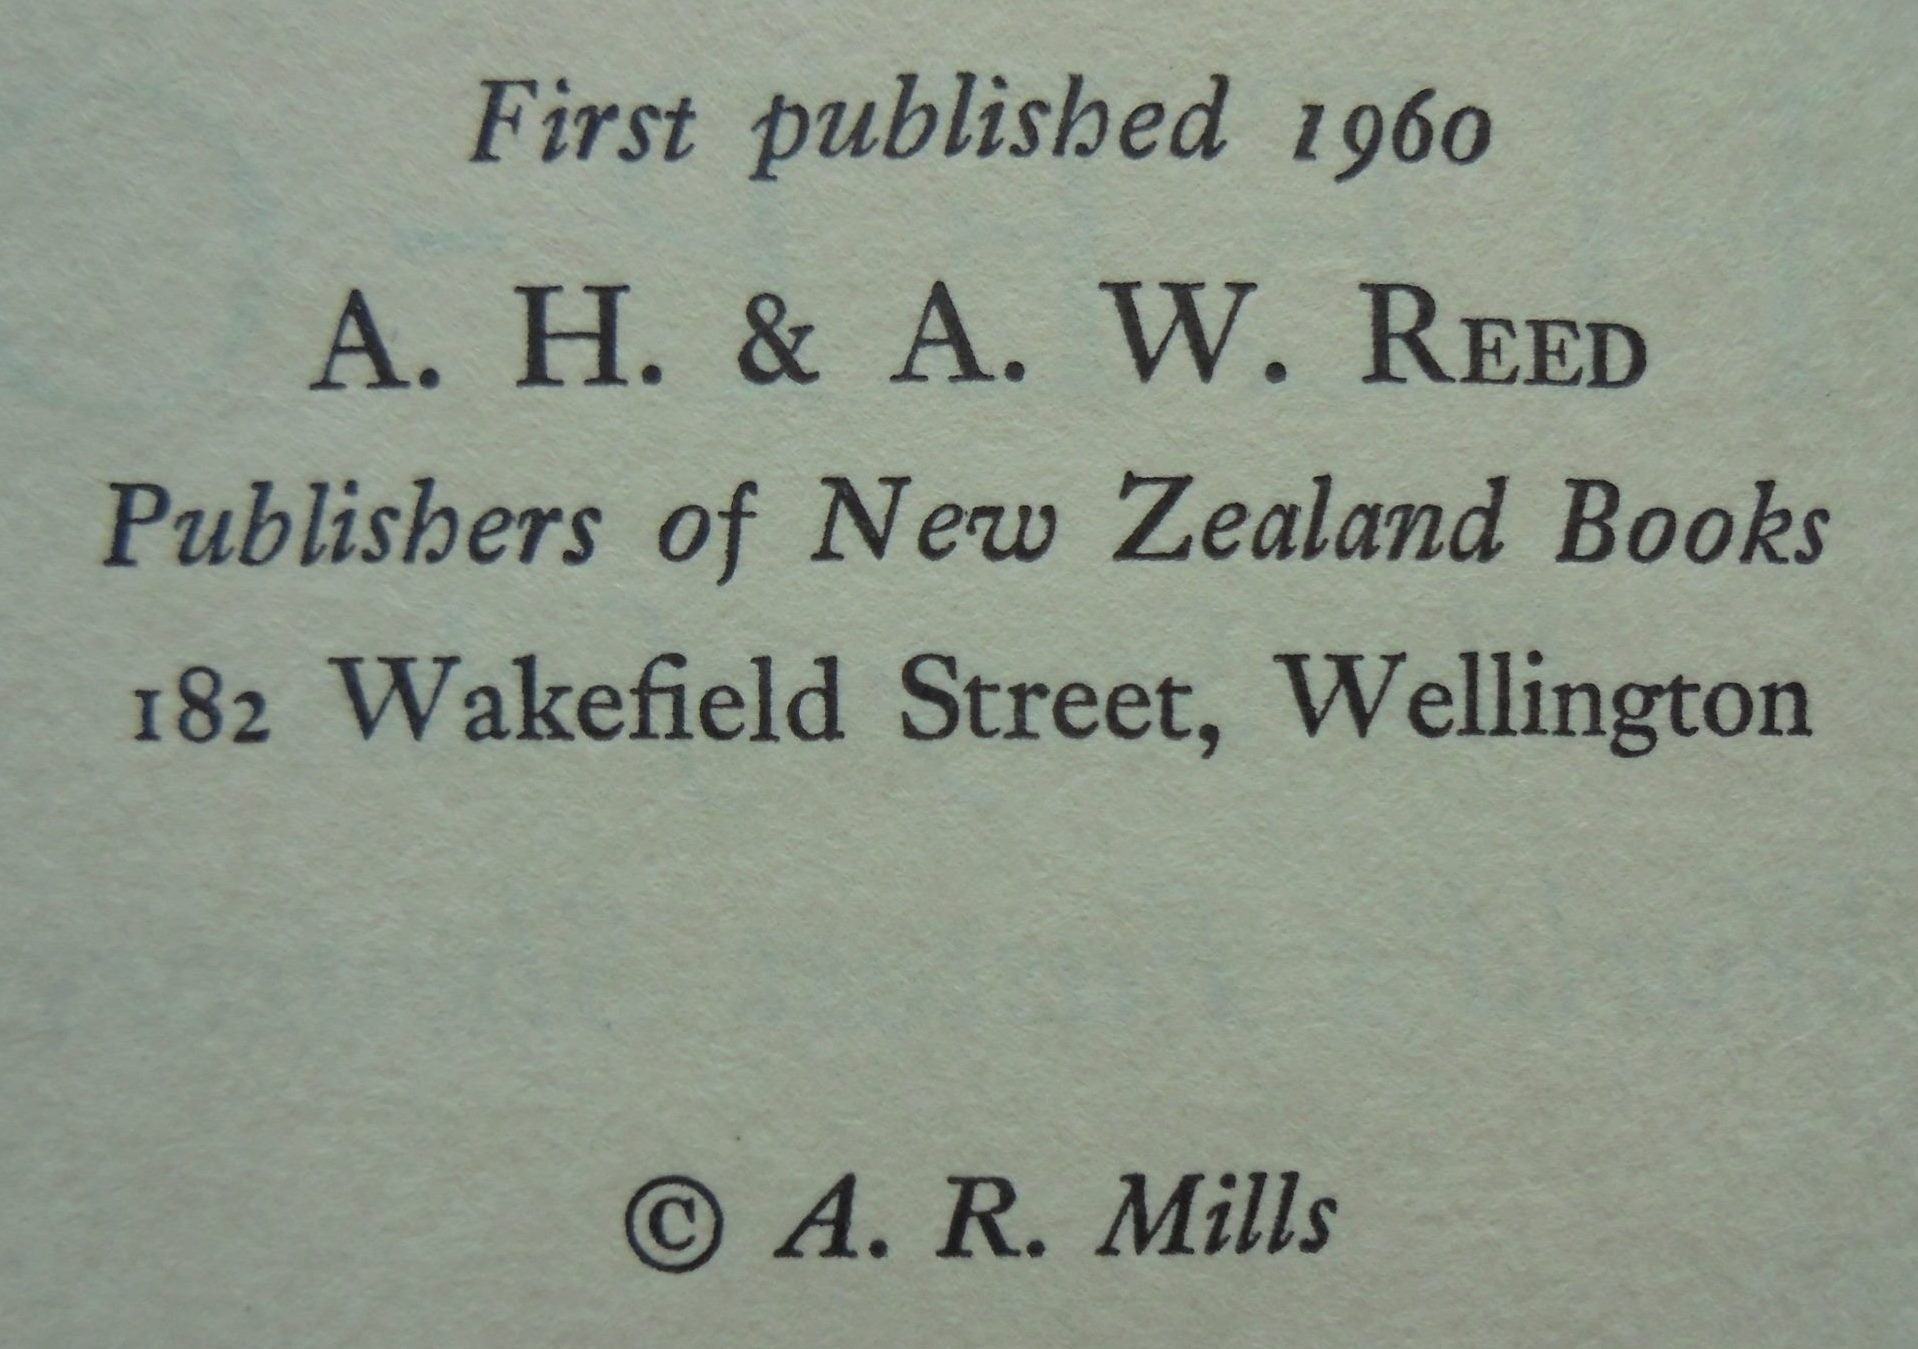 SHEEP-O! THE STORY OF THE WORLD’S FASTEST SHEARS by A.R. MILLS Hardback (1960)